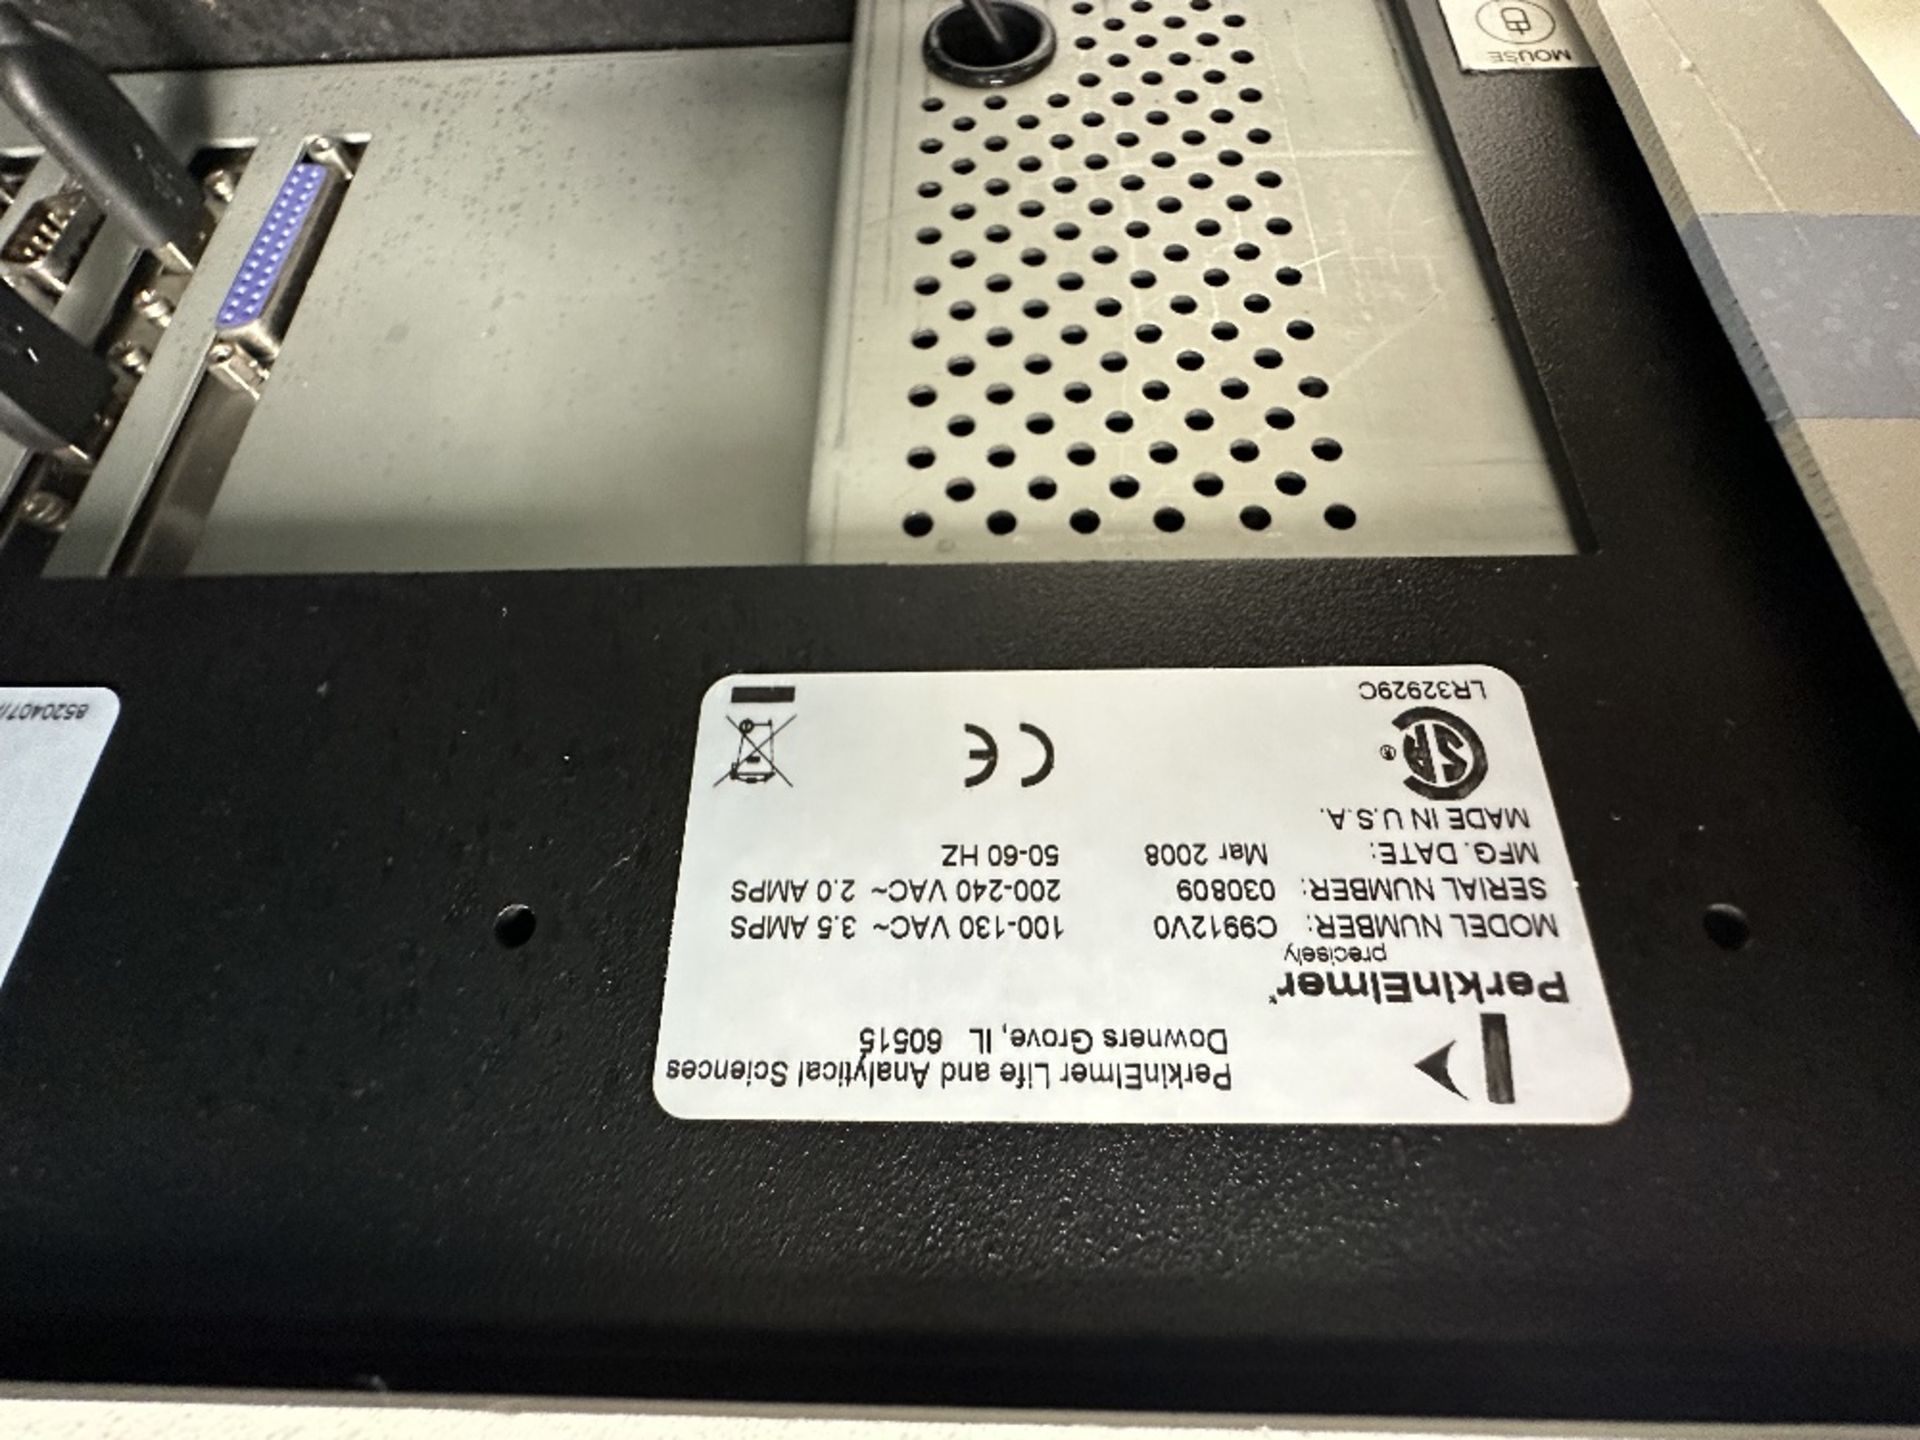 Perkin C9912V0 TopCount NXT Microplate Scintillation (LOCATED IN MIDDLETOWN, N.Y.)-FOR PACKAGING & - Image 3 of 3